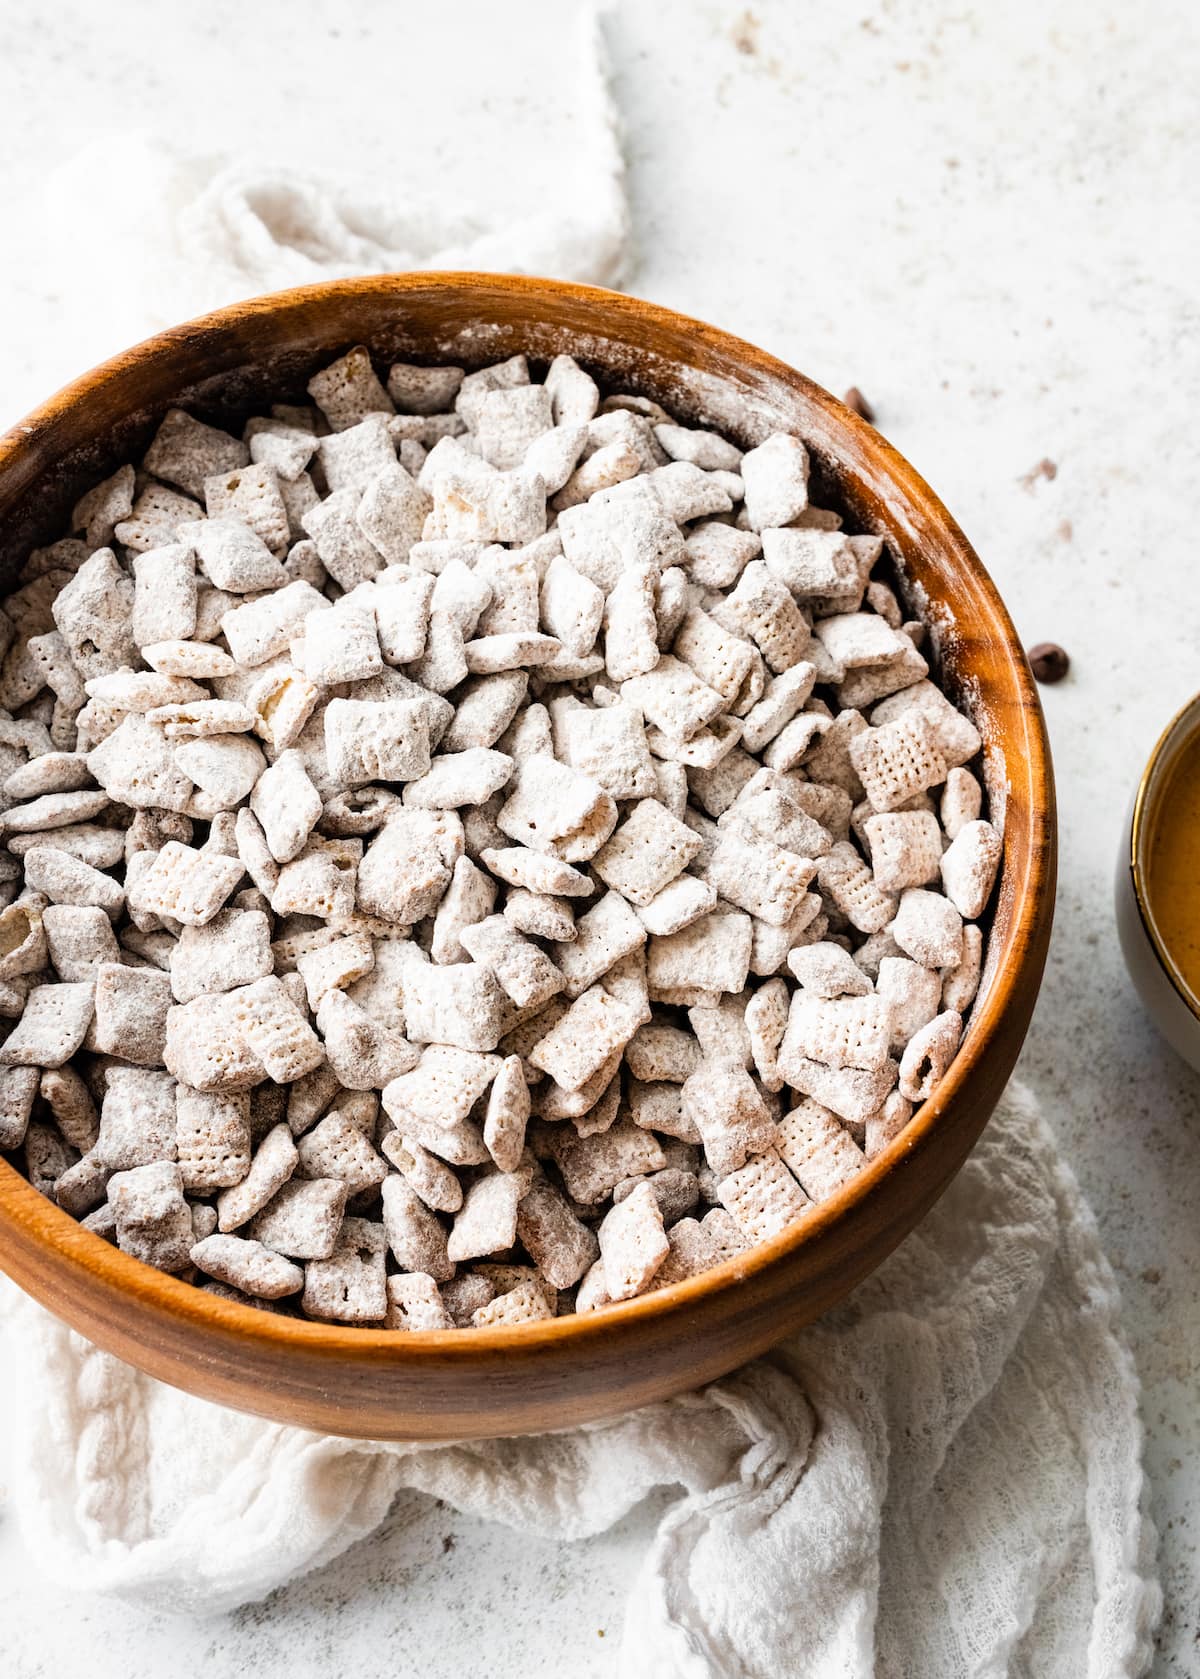 Puppy chow in a large wooden bowl.